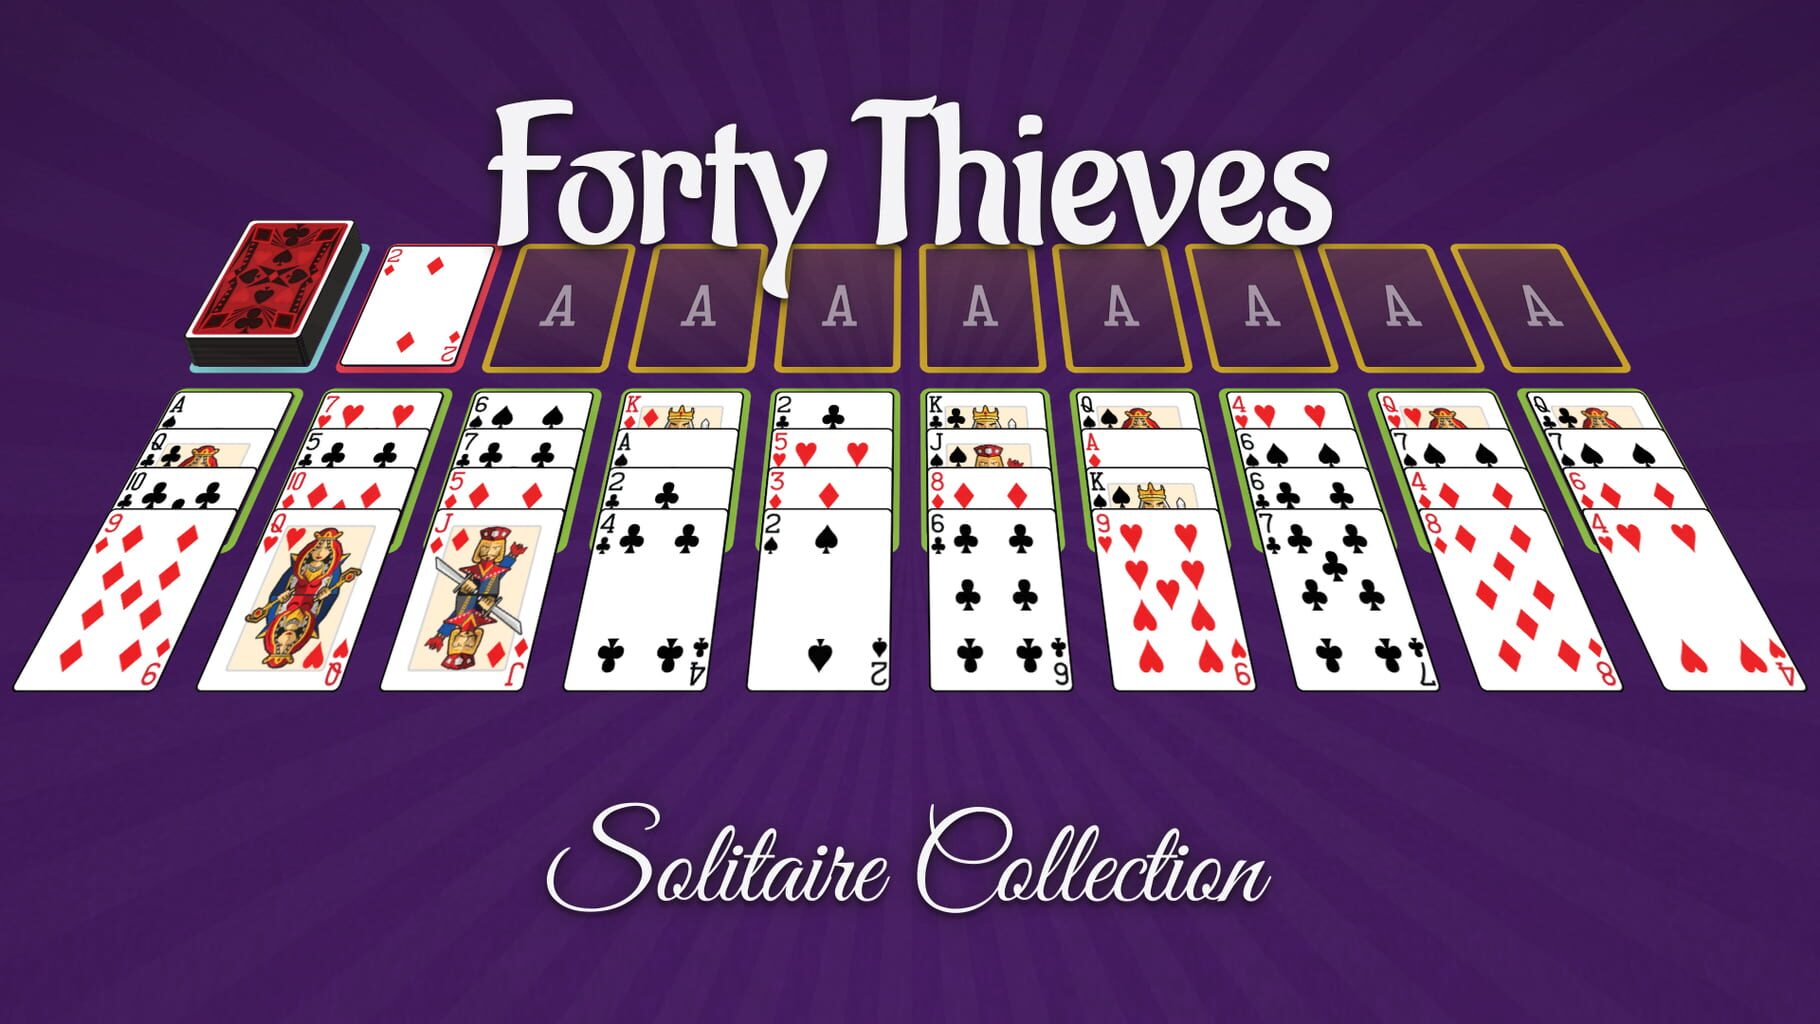 Forty Thieves Solitaire Collection artwork